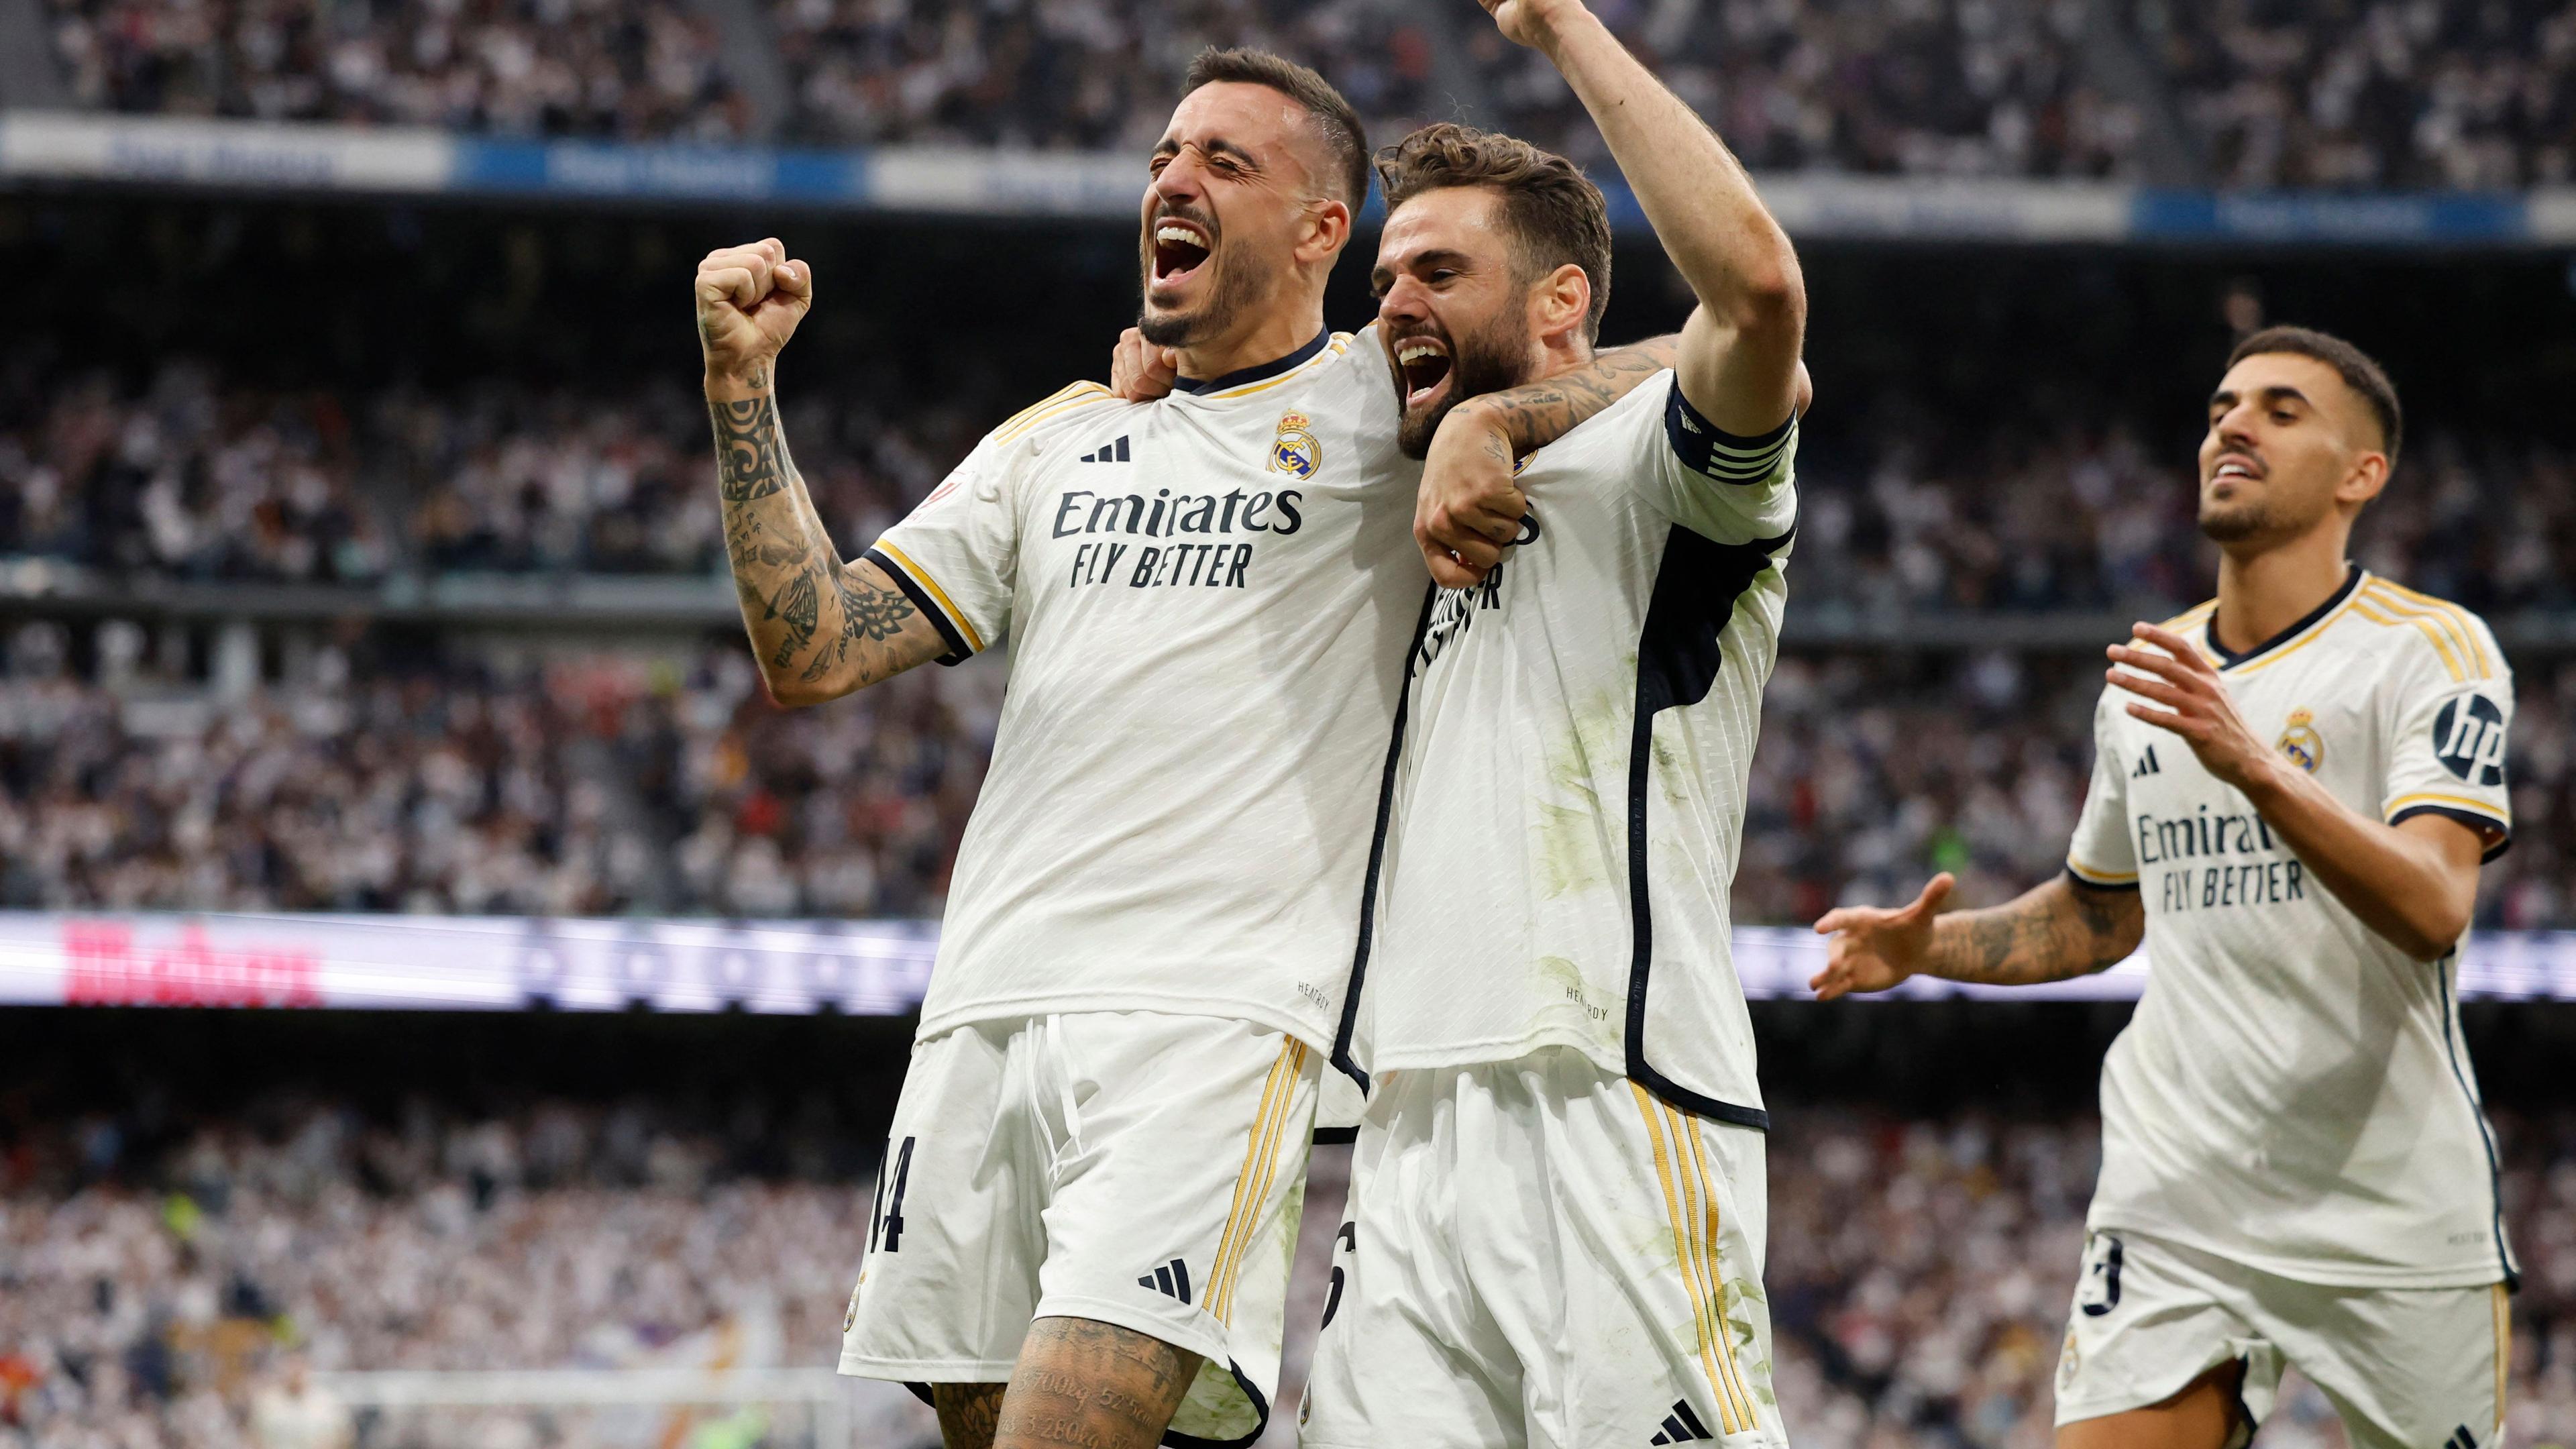 TOPSHOT - Real Madrid's Spanish forward #14 Joselu (L) celebrates scoring his team's third goal, with Real Madrid's Spanish defender #06 Nacho Fernandez, during the Spanish league football match between Real Madrid CF and Cadiz CF at the Santiago Bernabeu stadium in Madrid on May 4, 2024. (Photo by OSCAR DEL POZO / AFP)